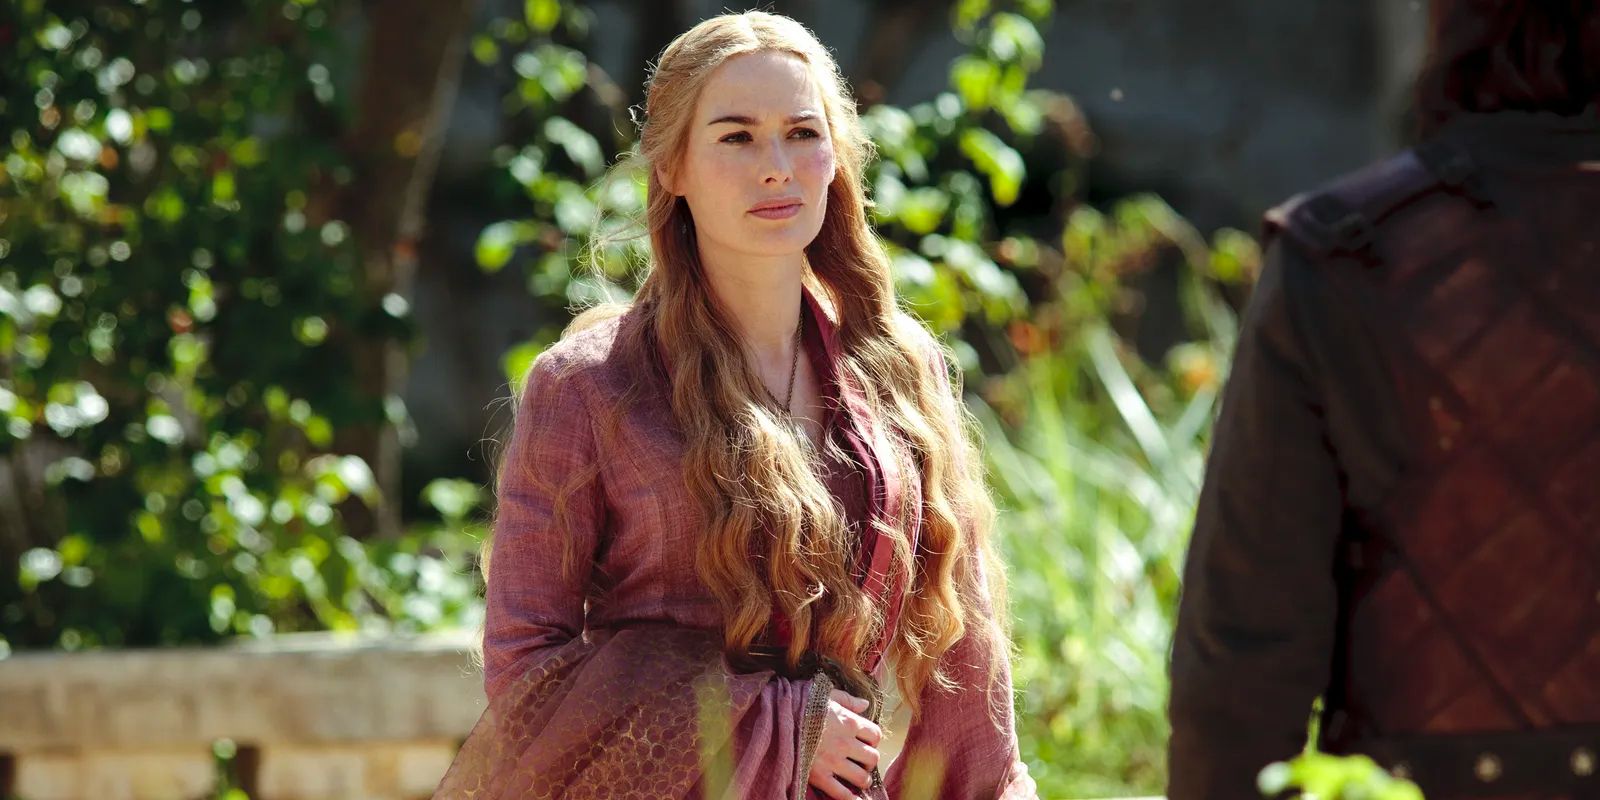 Cersei Lanniser (Lena Headey) stands in a courtyard talking to one of her men.